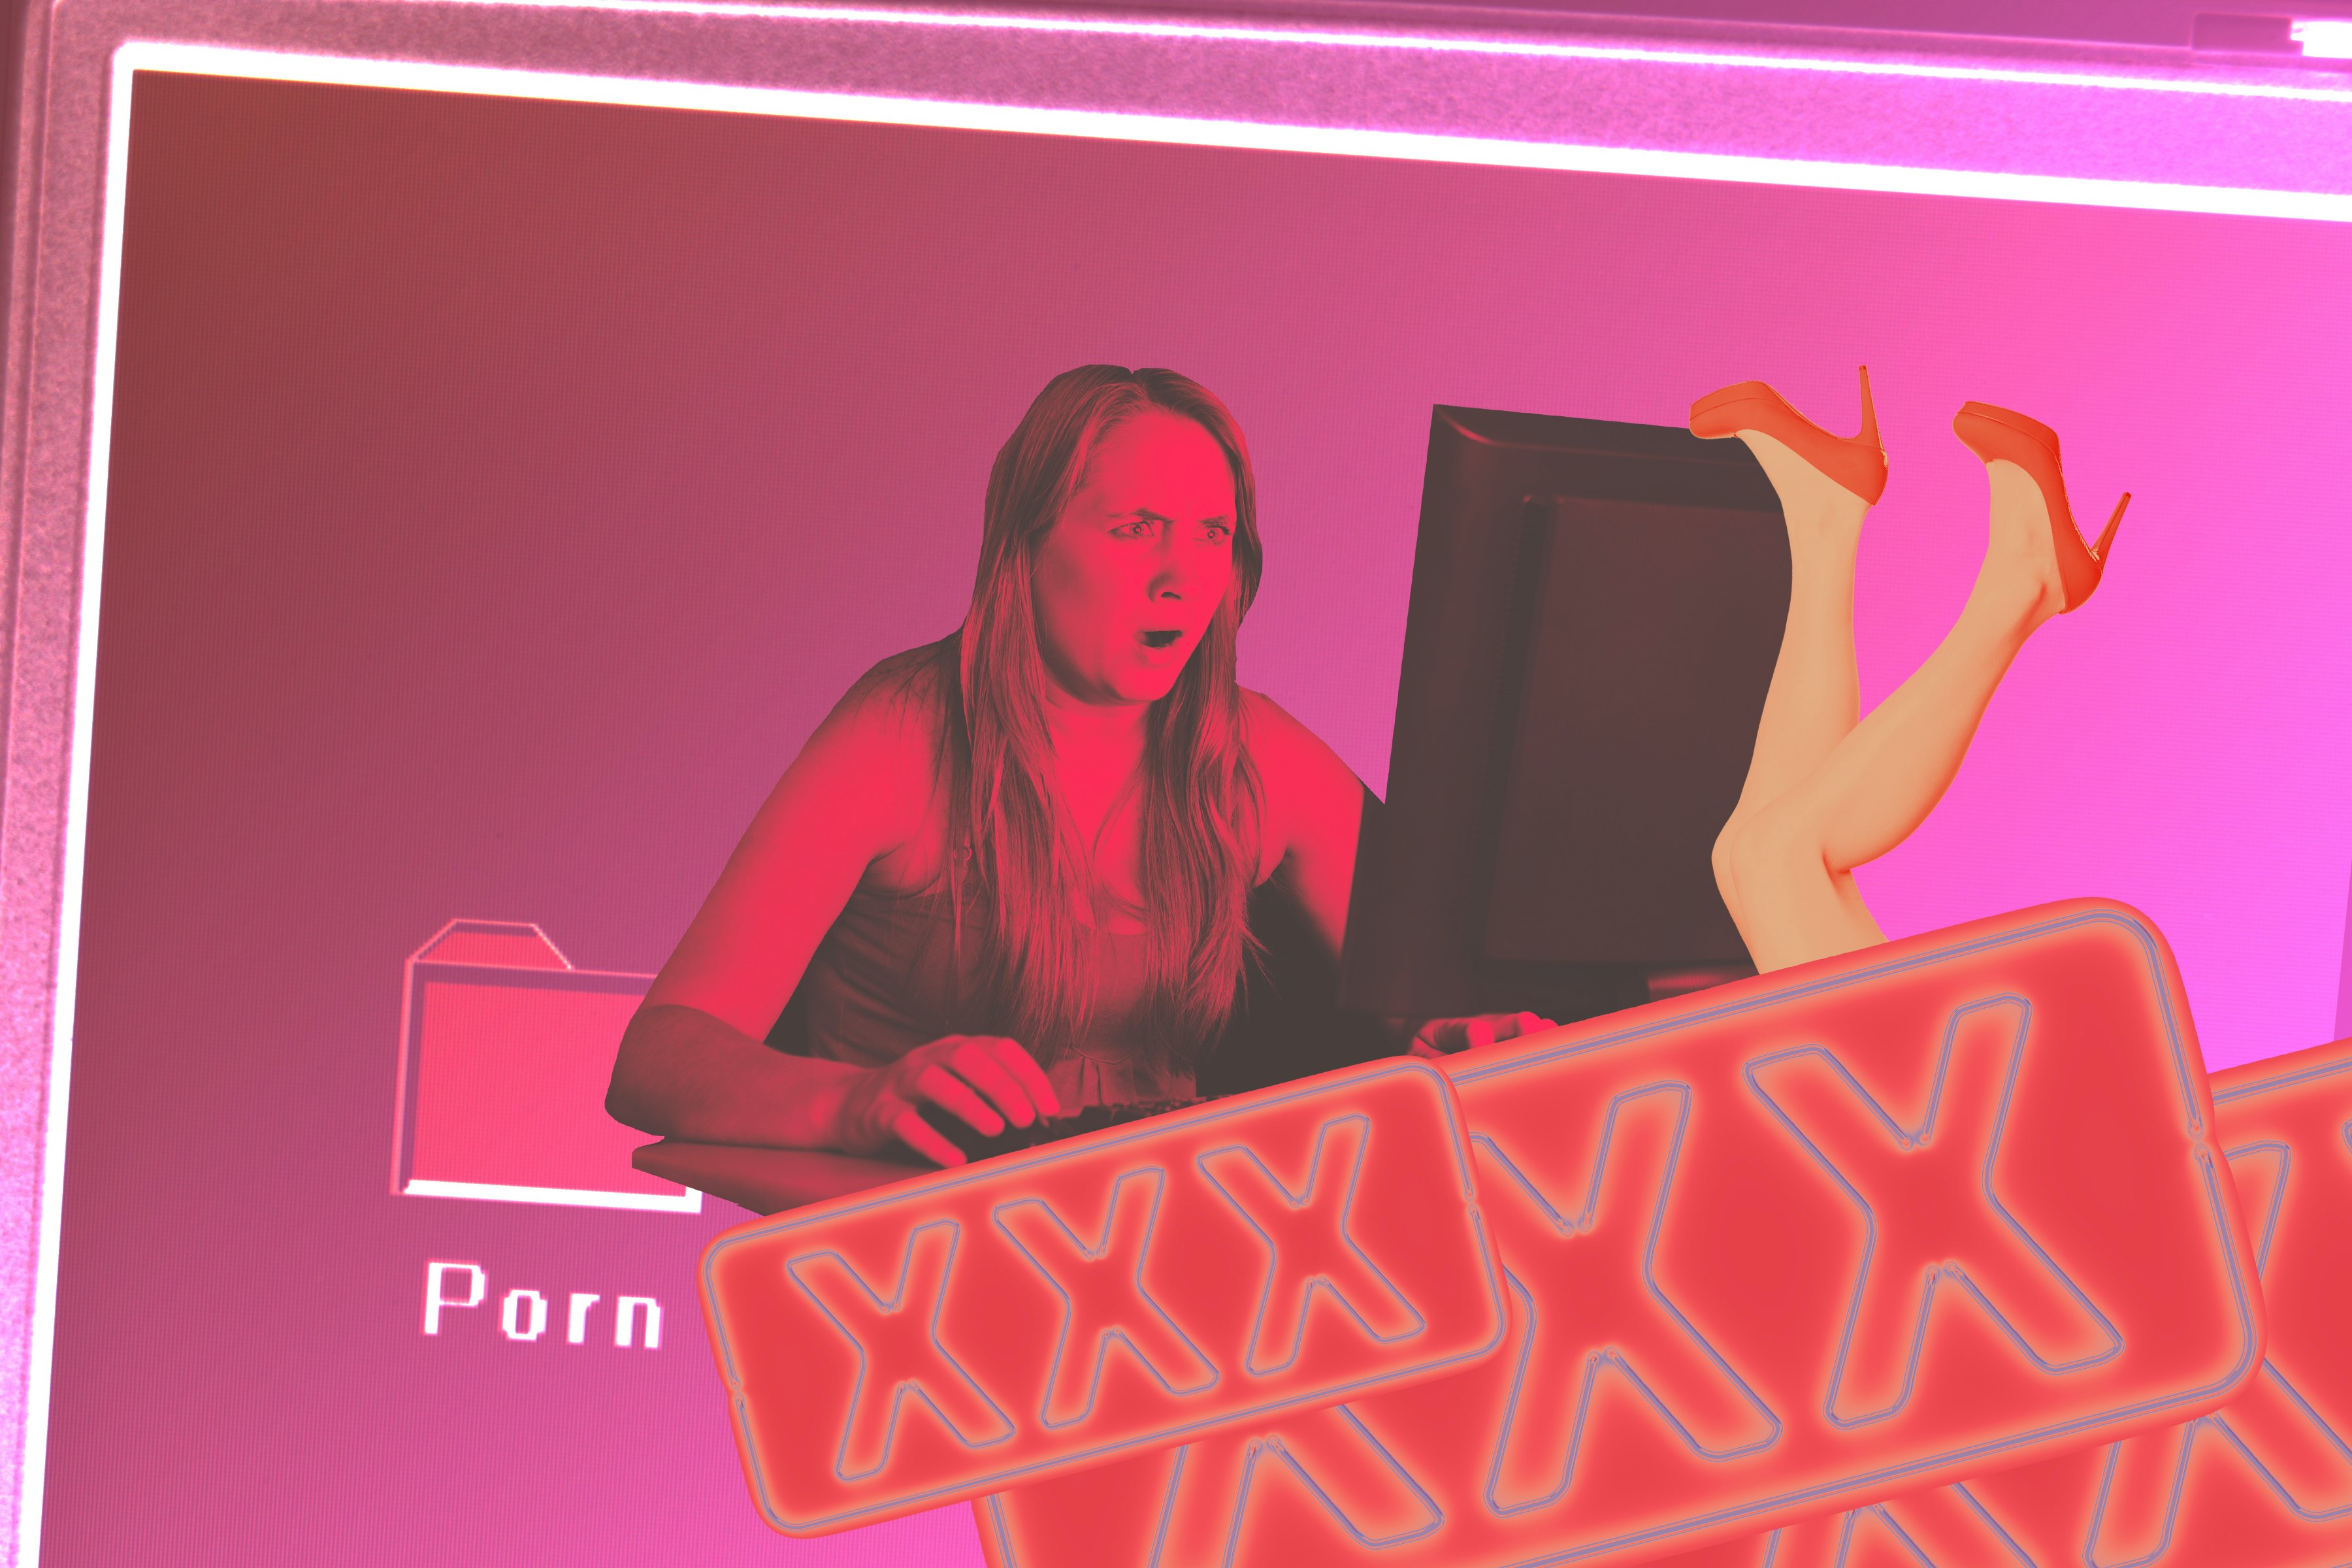 Women are seeking out porn addicts on Reddit for relationship advice